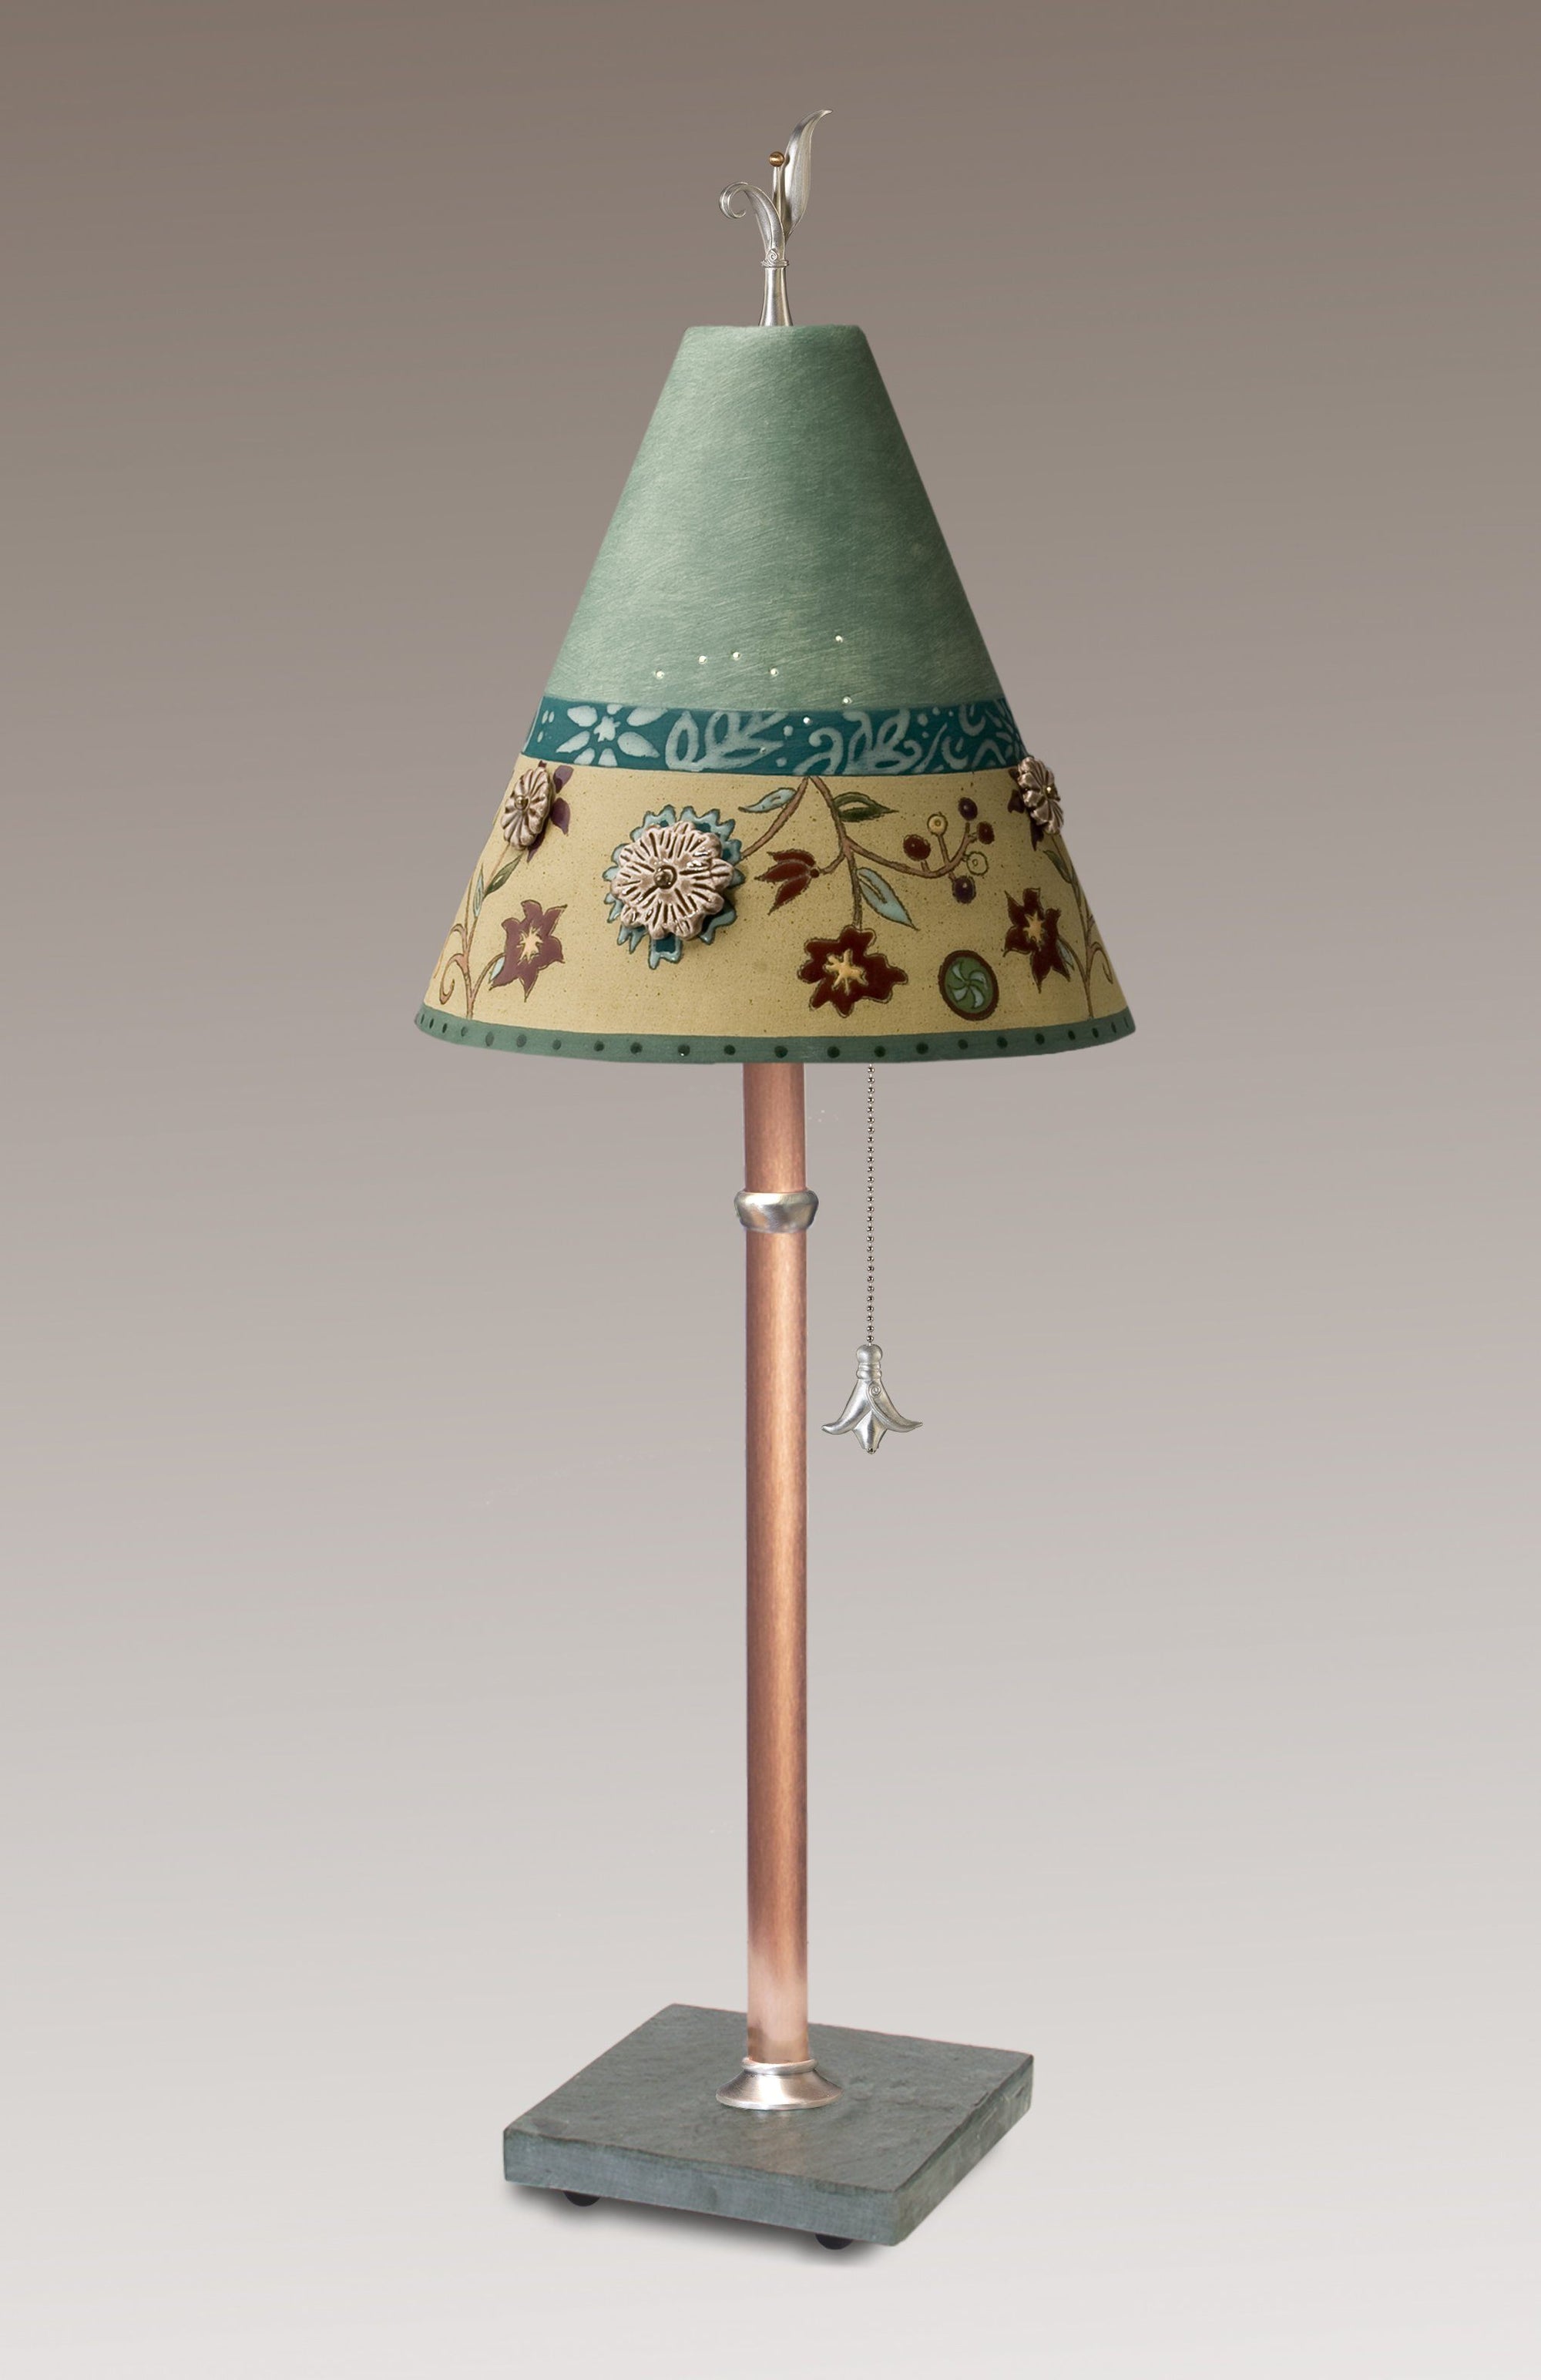 Janna Ugone & Co Table Lamps Copper Table Lamp with Small Conical Ceramic Shade in Eden Sea Glass